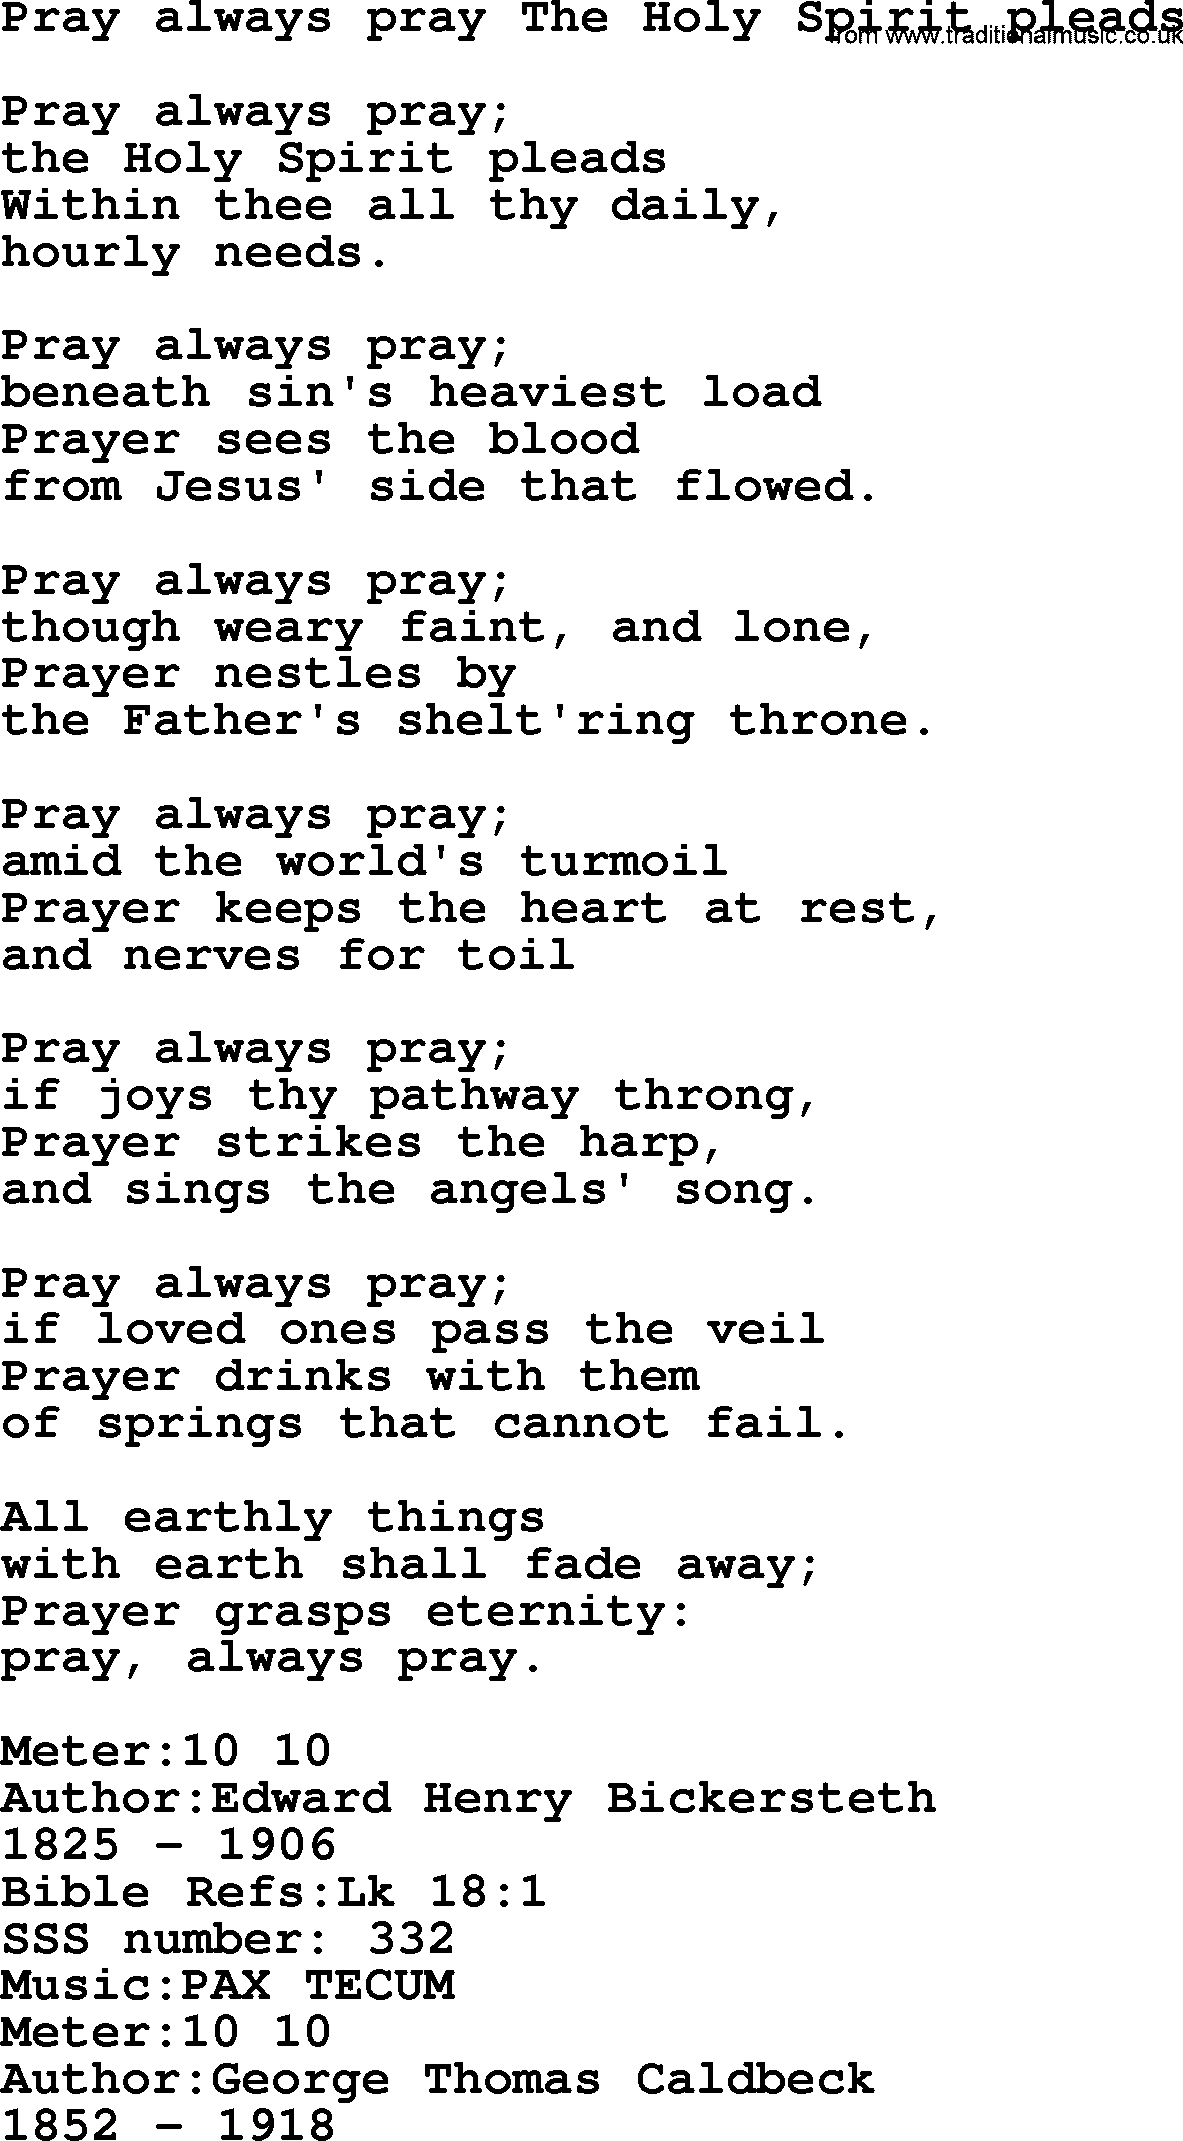 Sacred Songs and Solos complete, 1200 Hymns, title: Pray Always Pray The Holy Spirit Pleads, lyrics and PDF